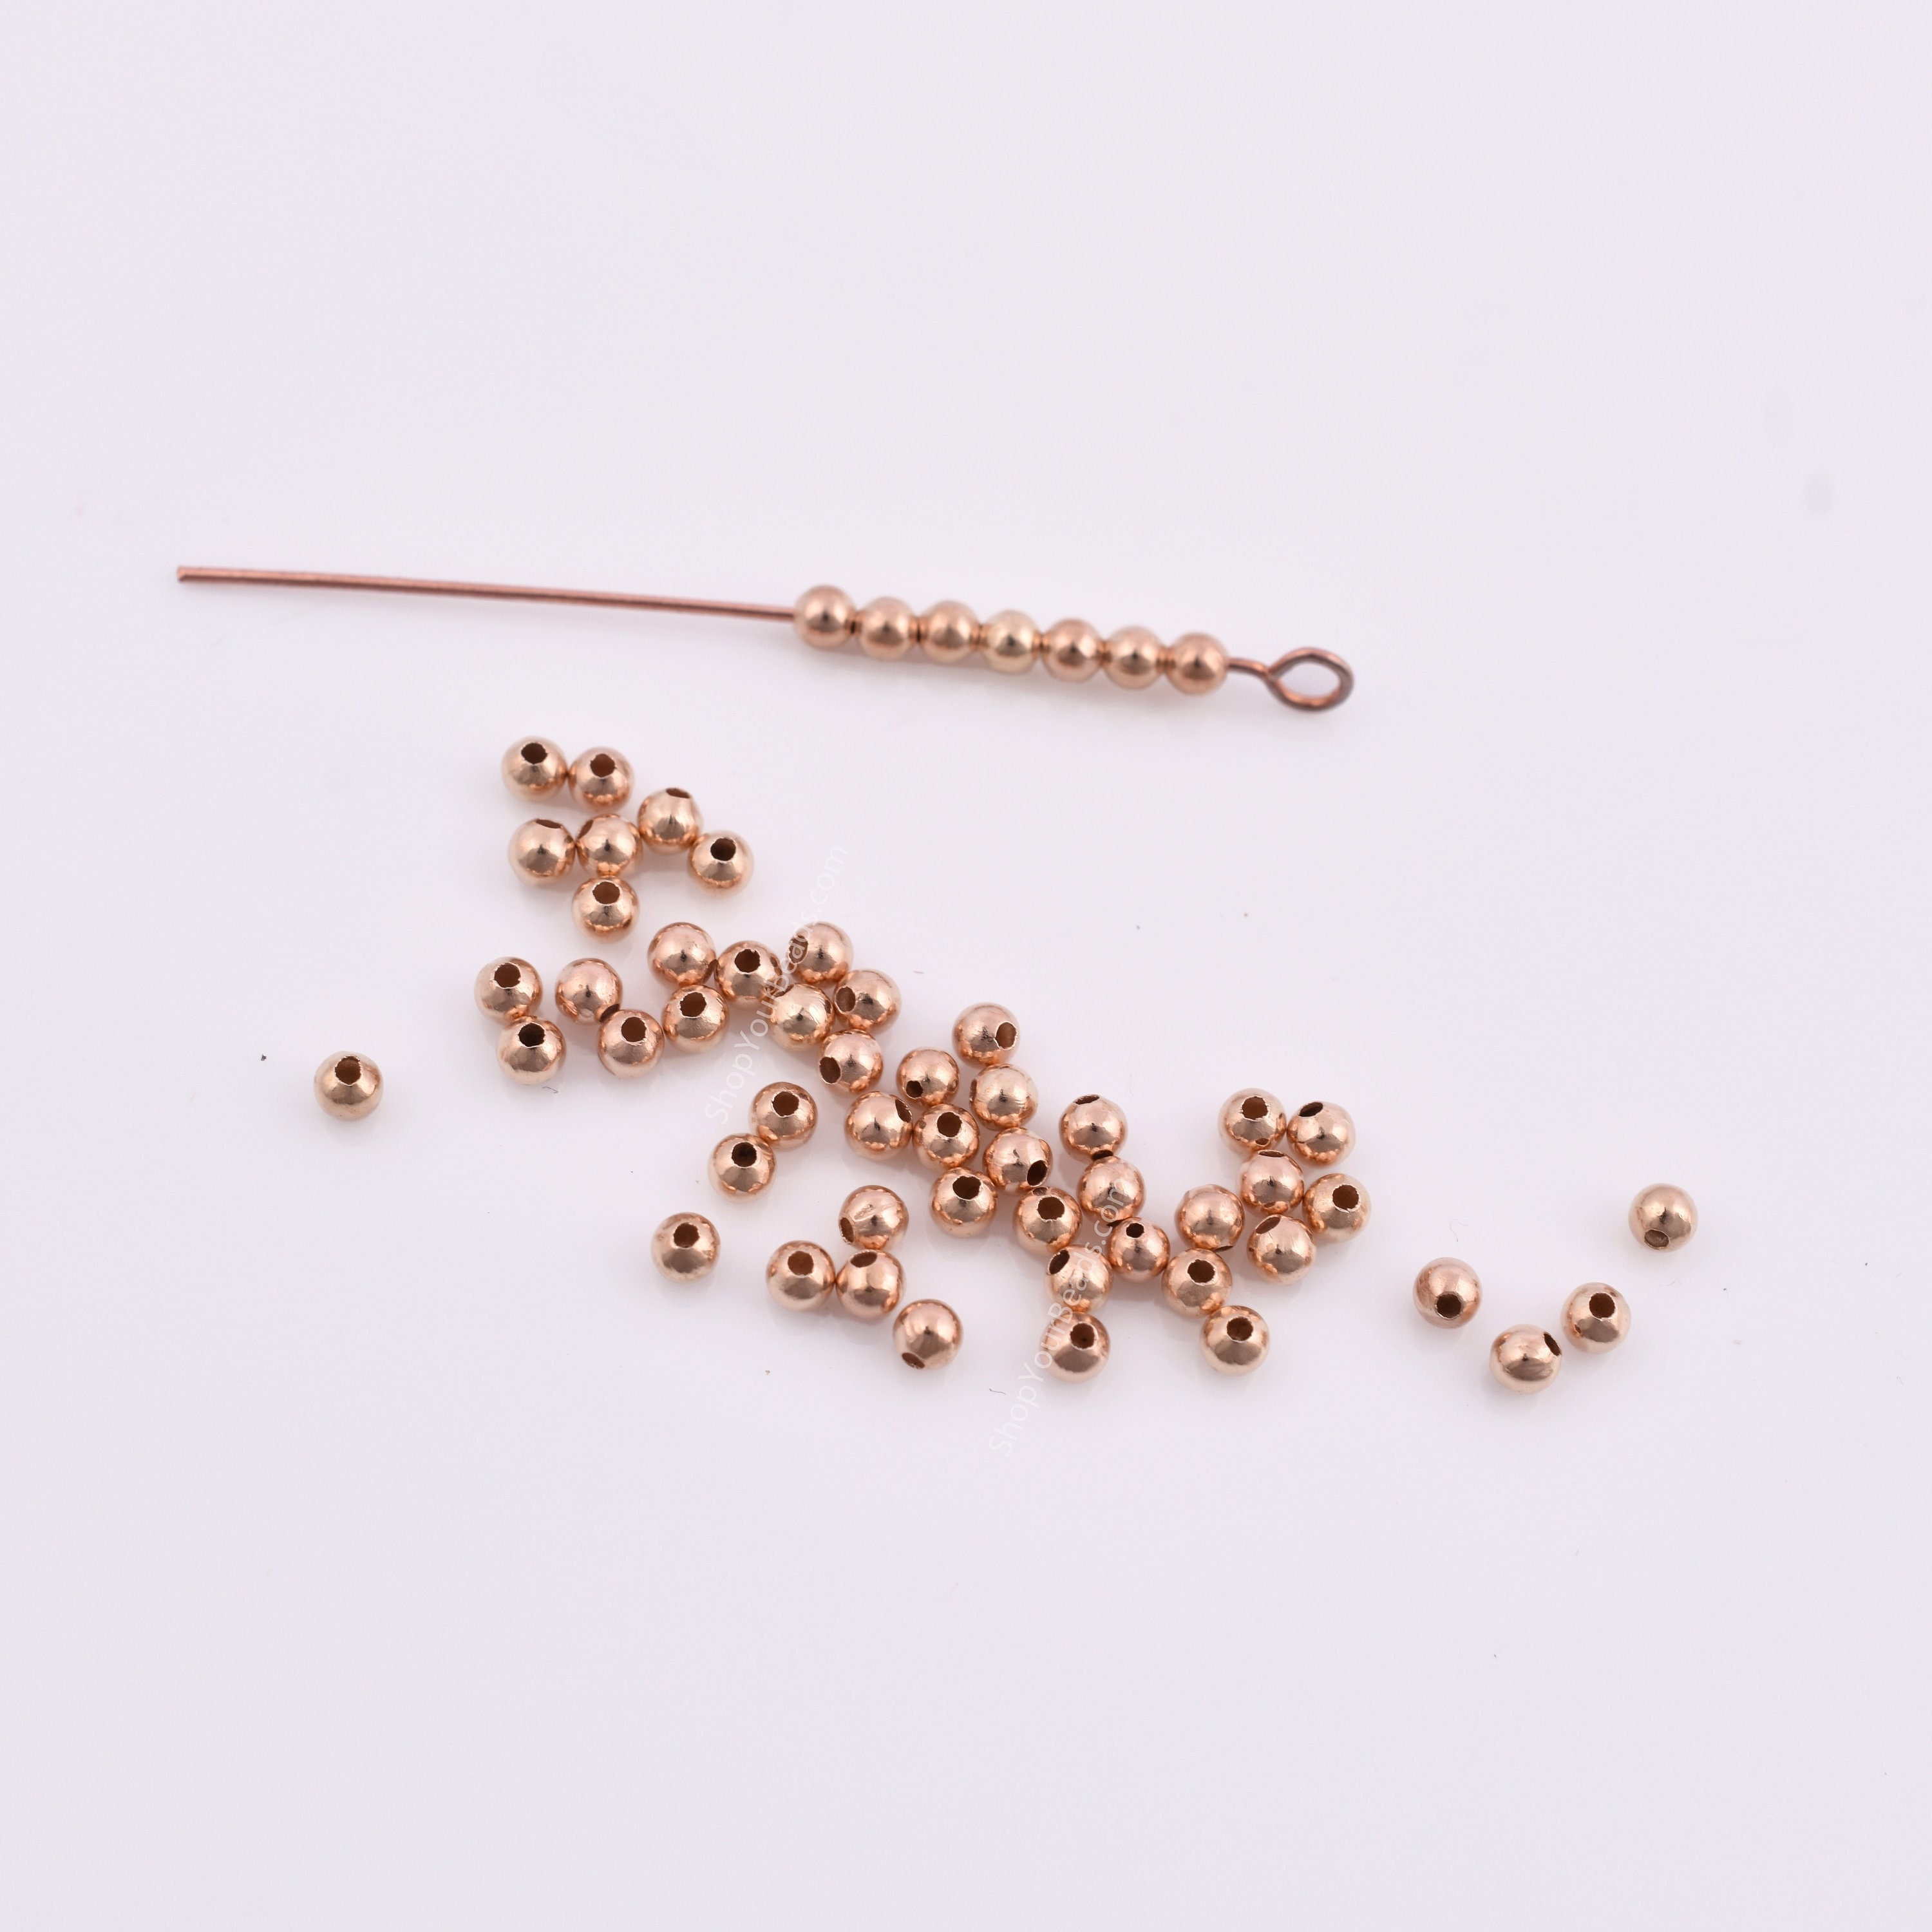 Wholesale 200Pcs 3mm Round Metal Ball Spacer Beads For Jewelry Making DIY Copper 